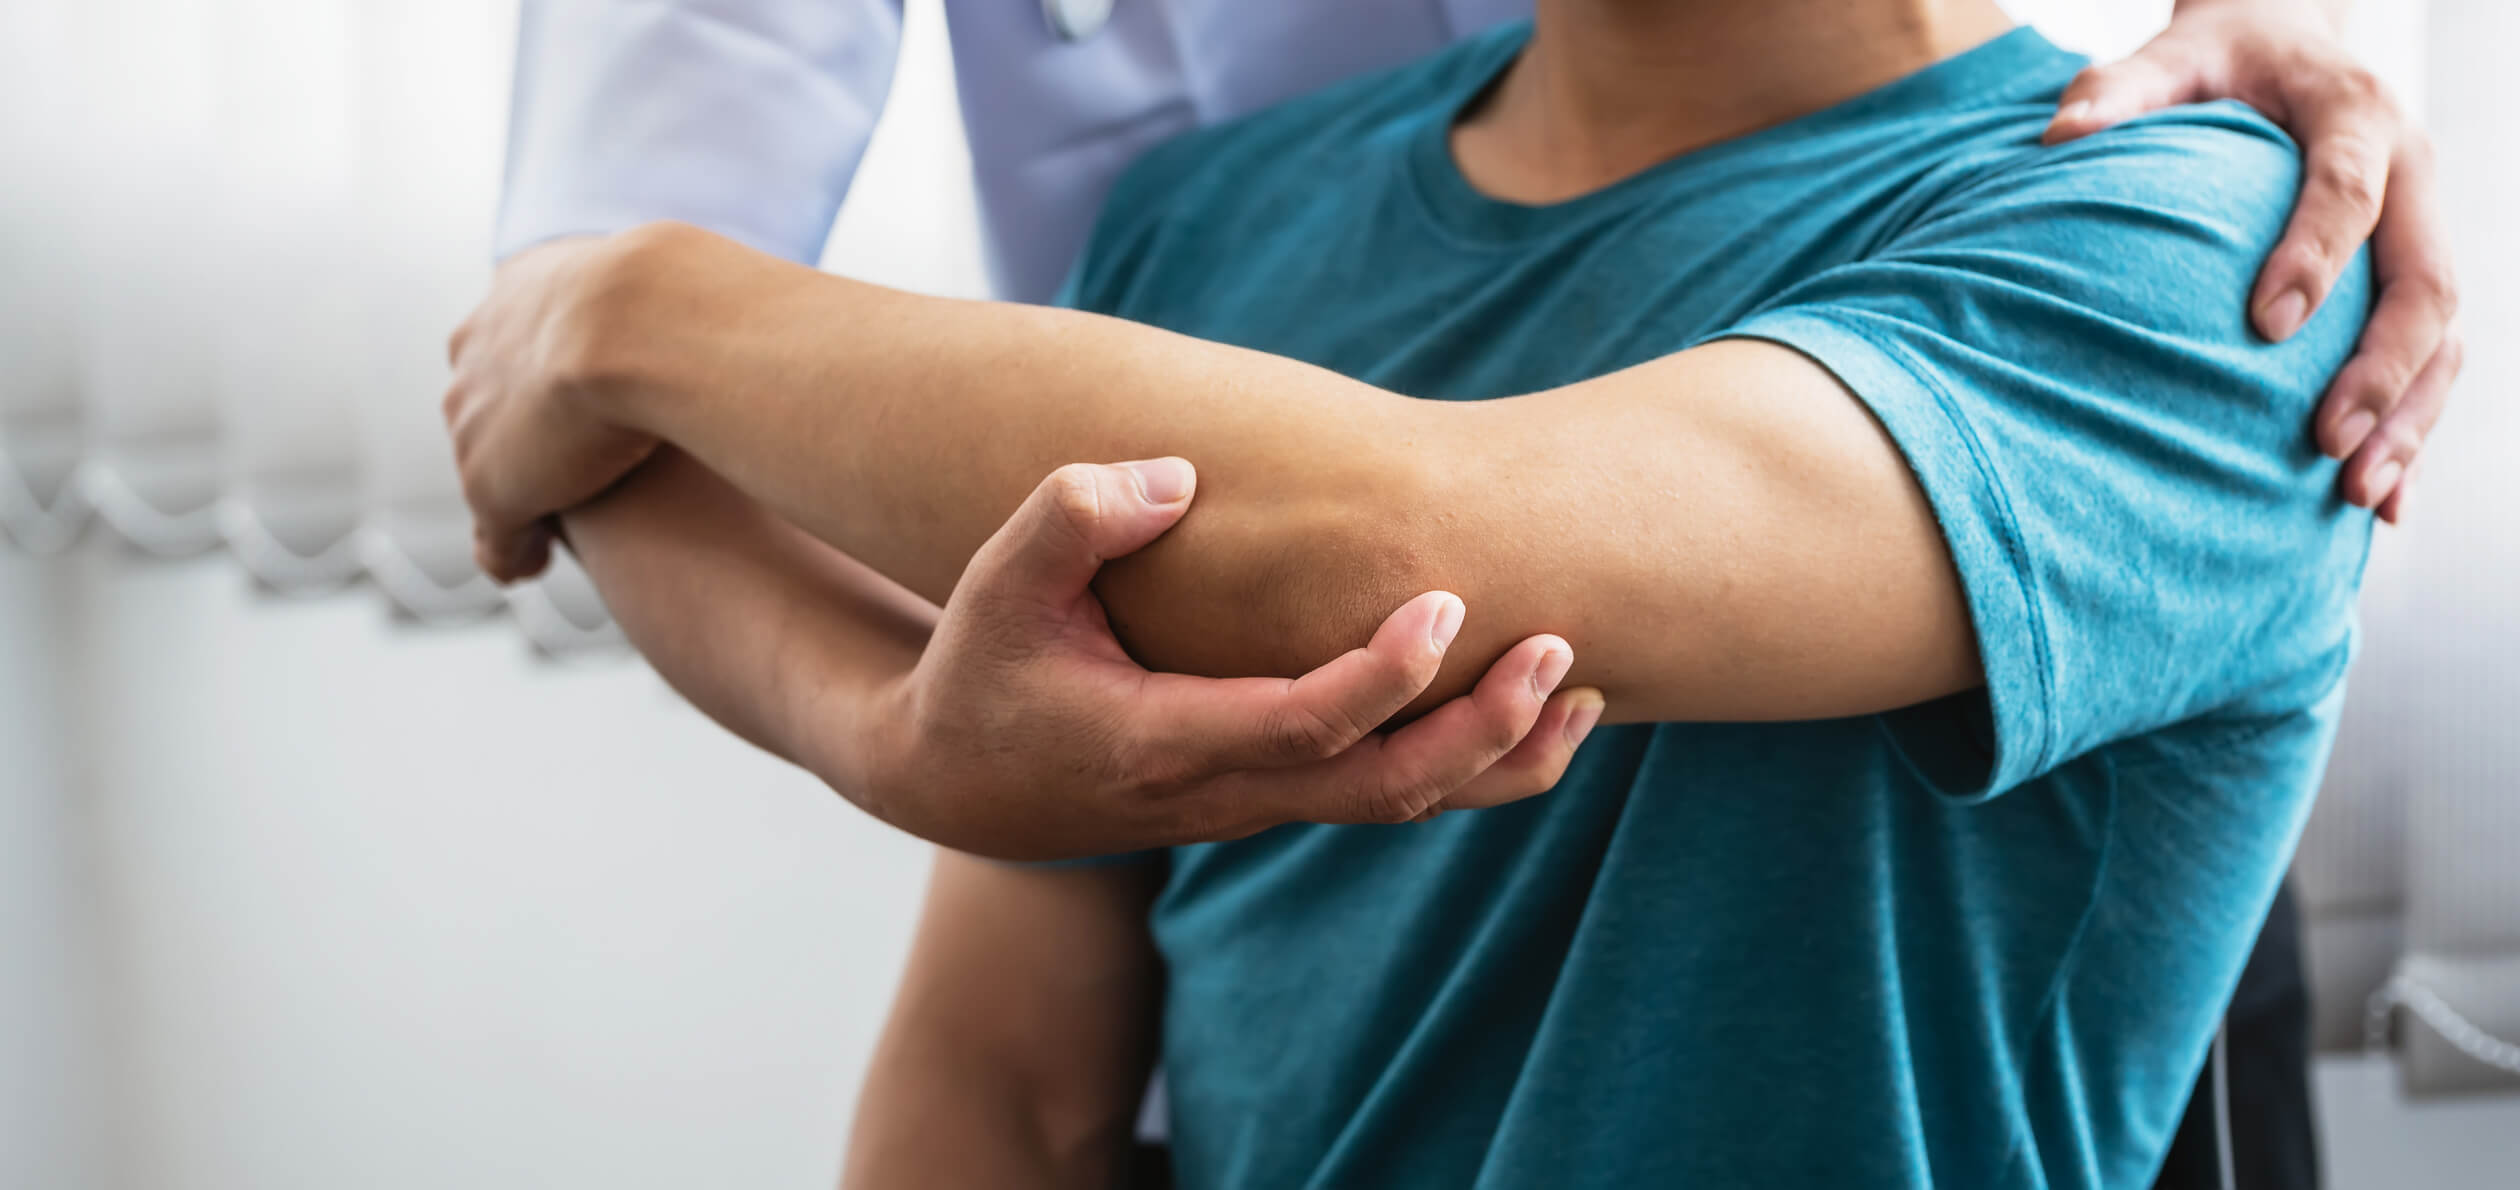 How to Reduce Chronic Inflammation to Alleviate Joint Pain | The Integrative Medicine Approach to Joint Pain and Arthritis